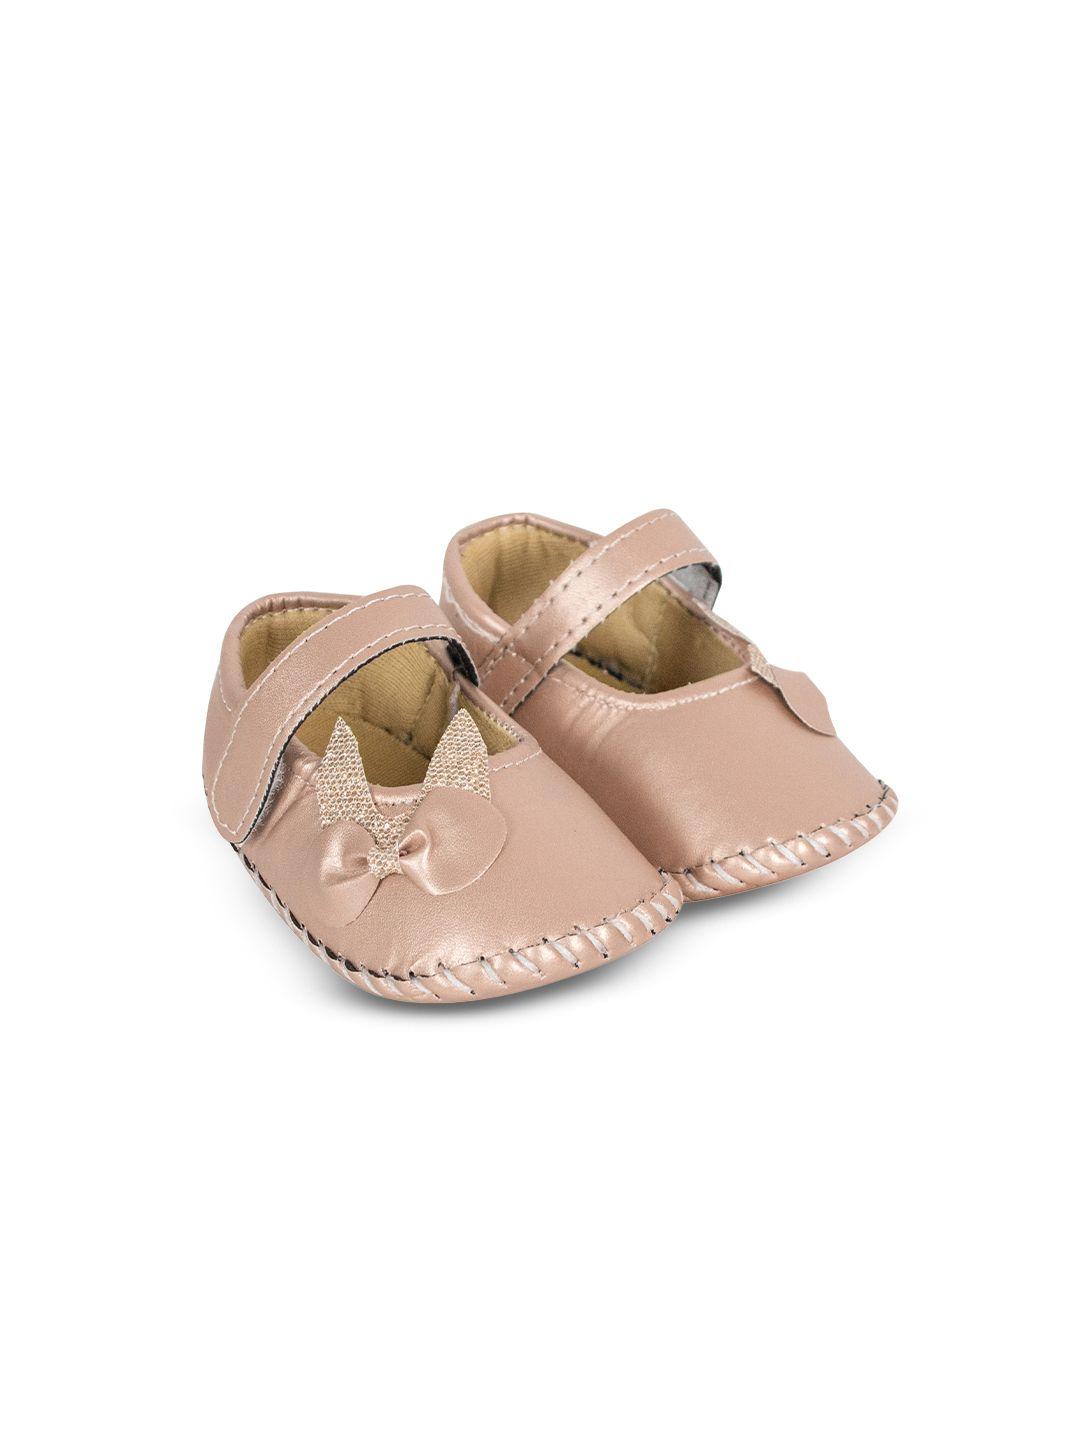 baesd infant bow detailed booties